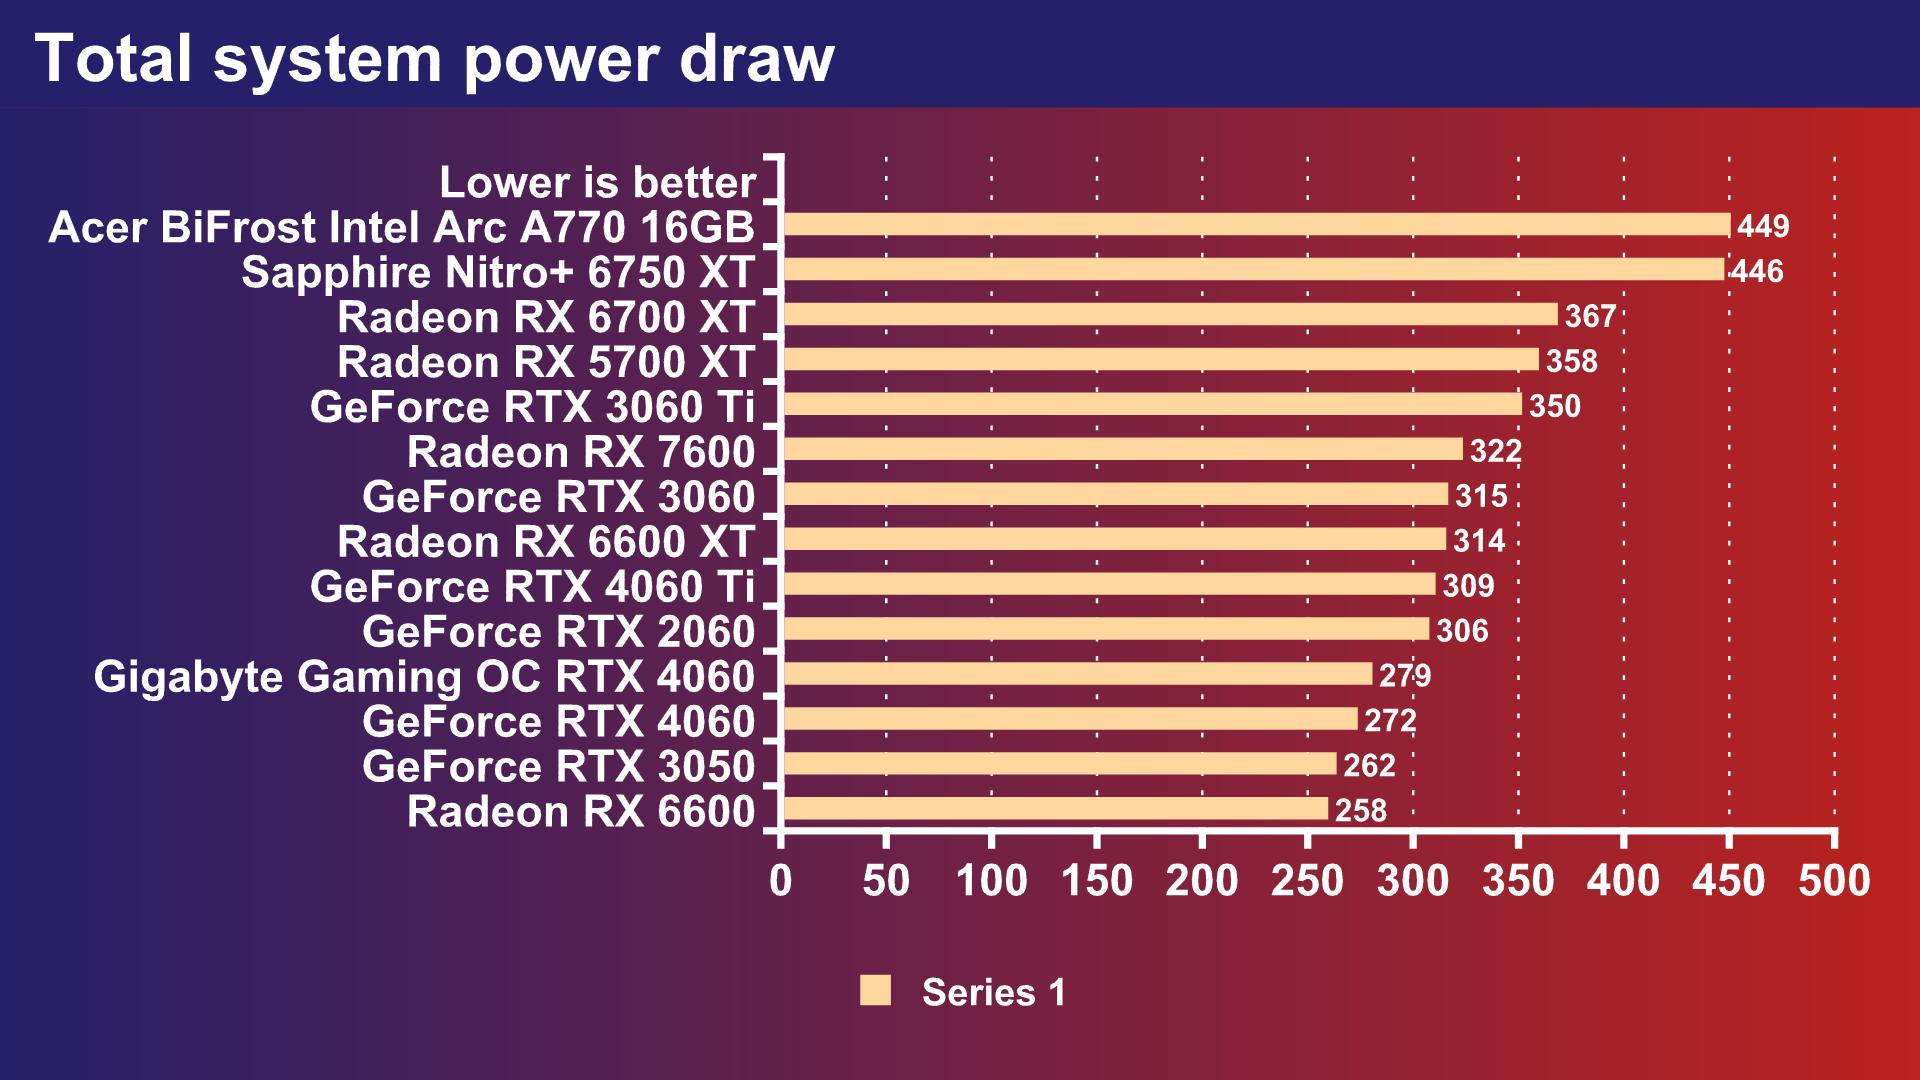 Acer BiFrost Intel Arc A770 review: Power draw graph